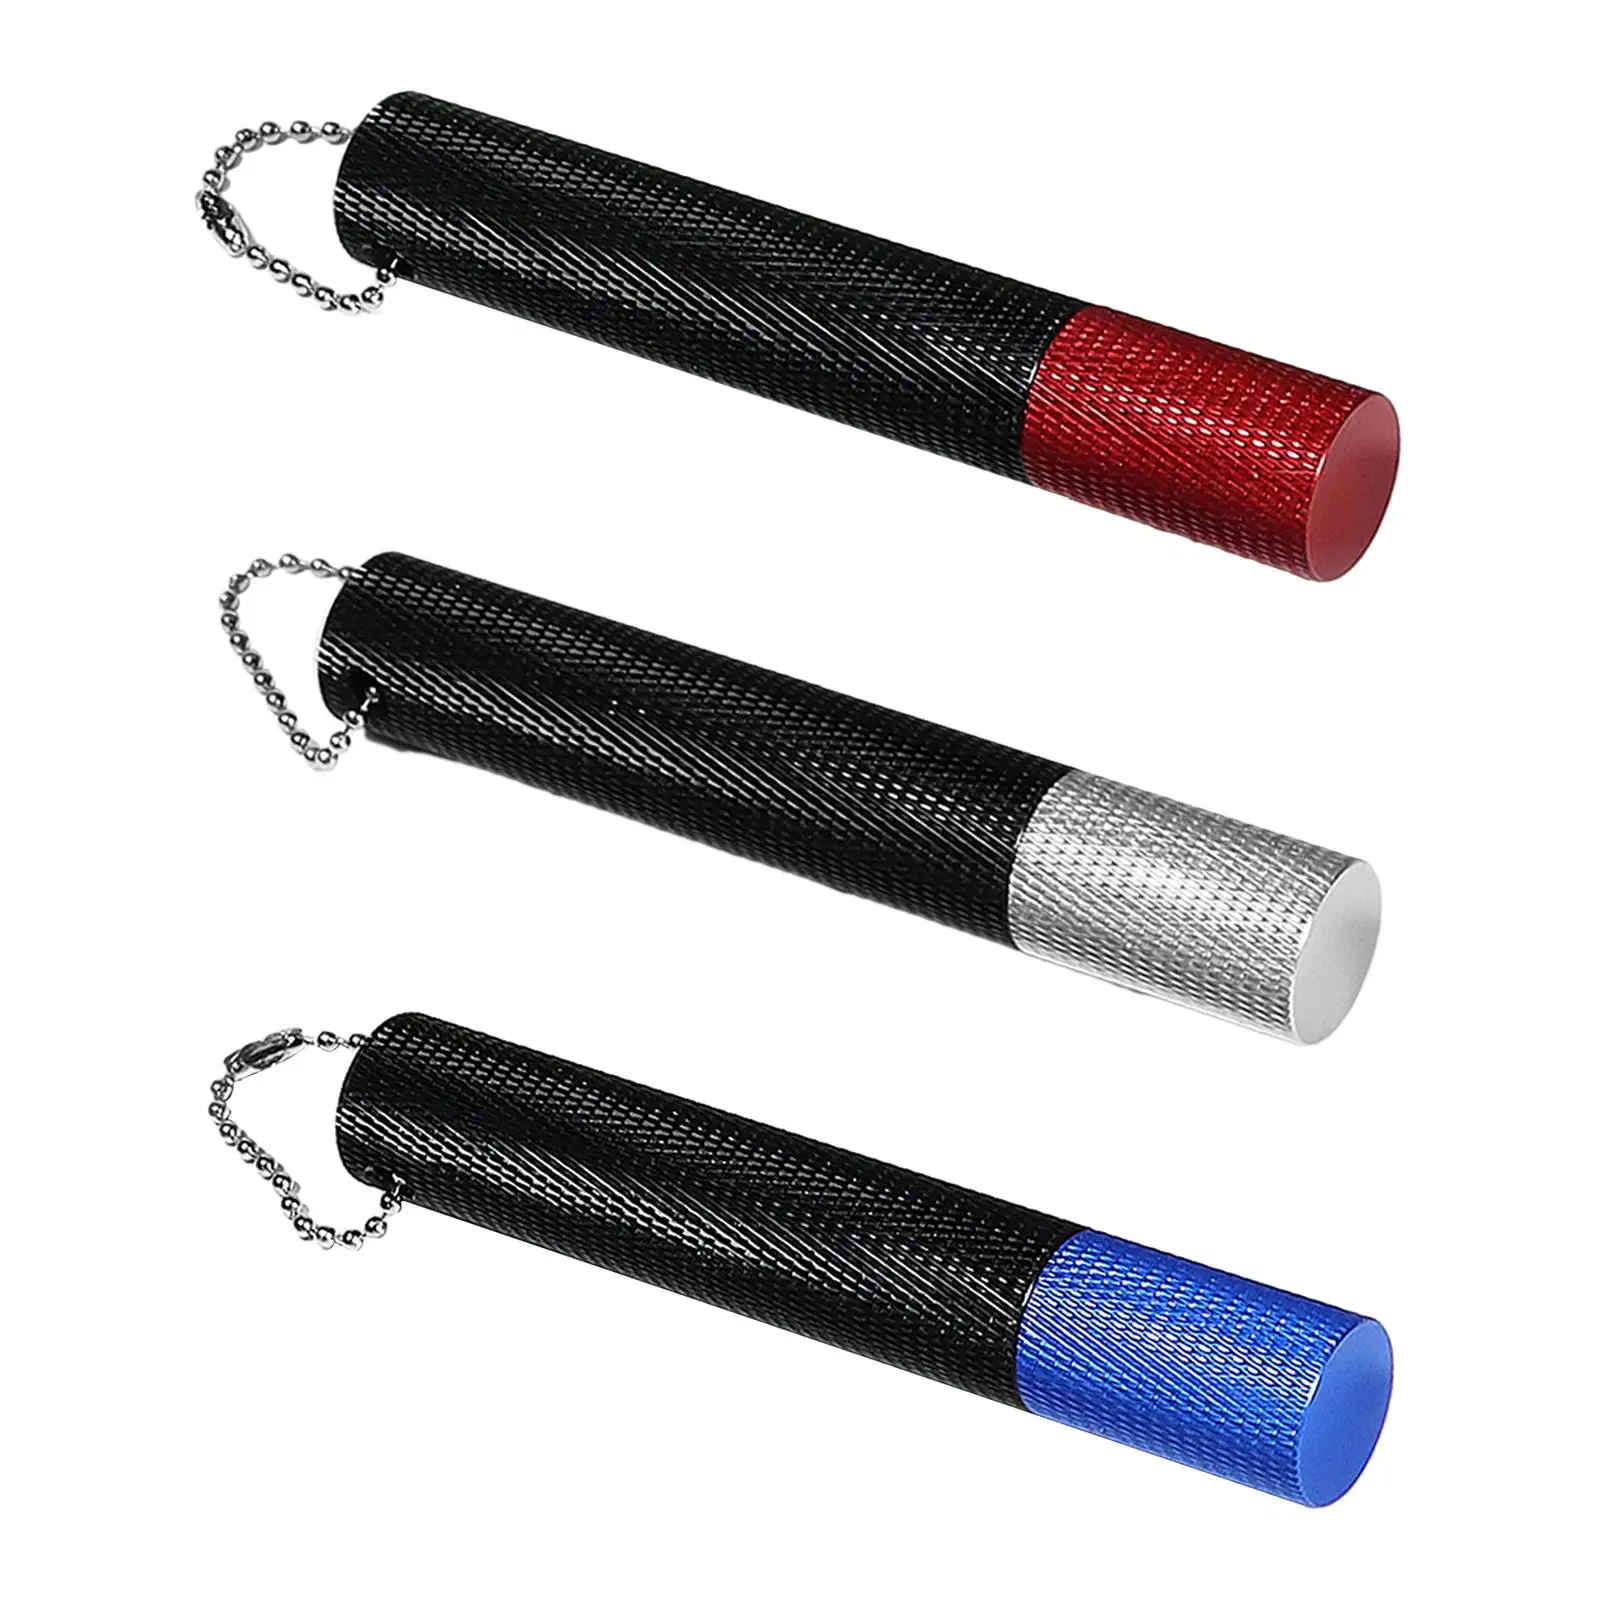 Golf Club Groove Sharpener Portable Cleaner Cleaning Tool for Utility Clubs Golf Balls Outdoor Sports Golf Training Wedges Irons